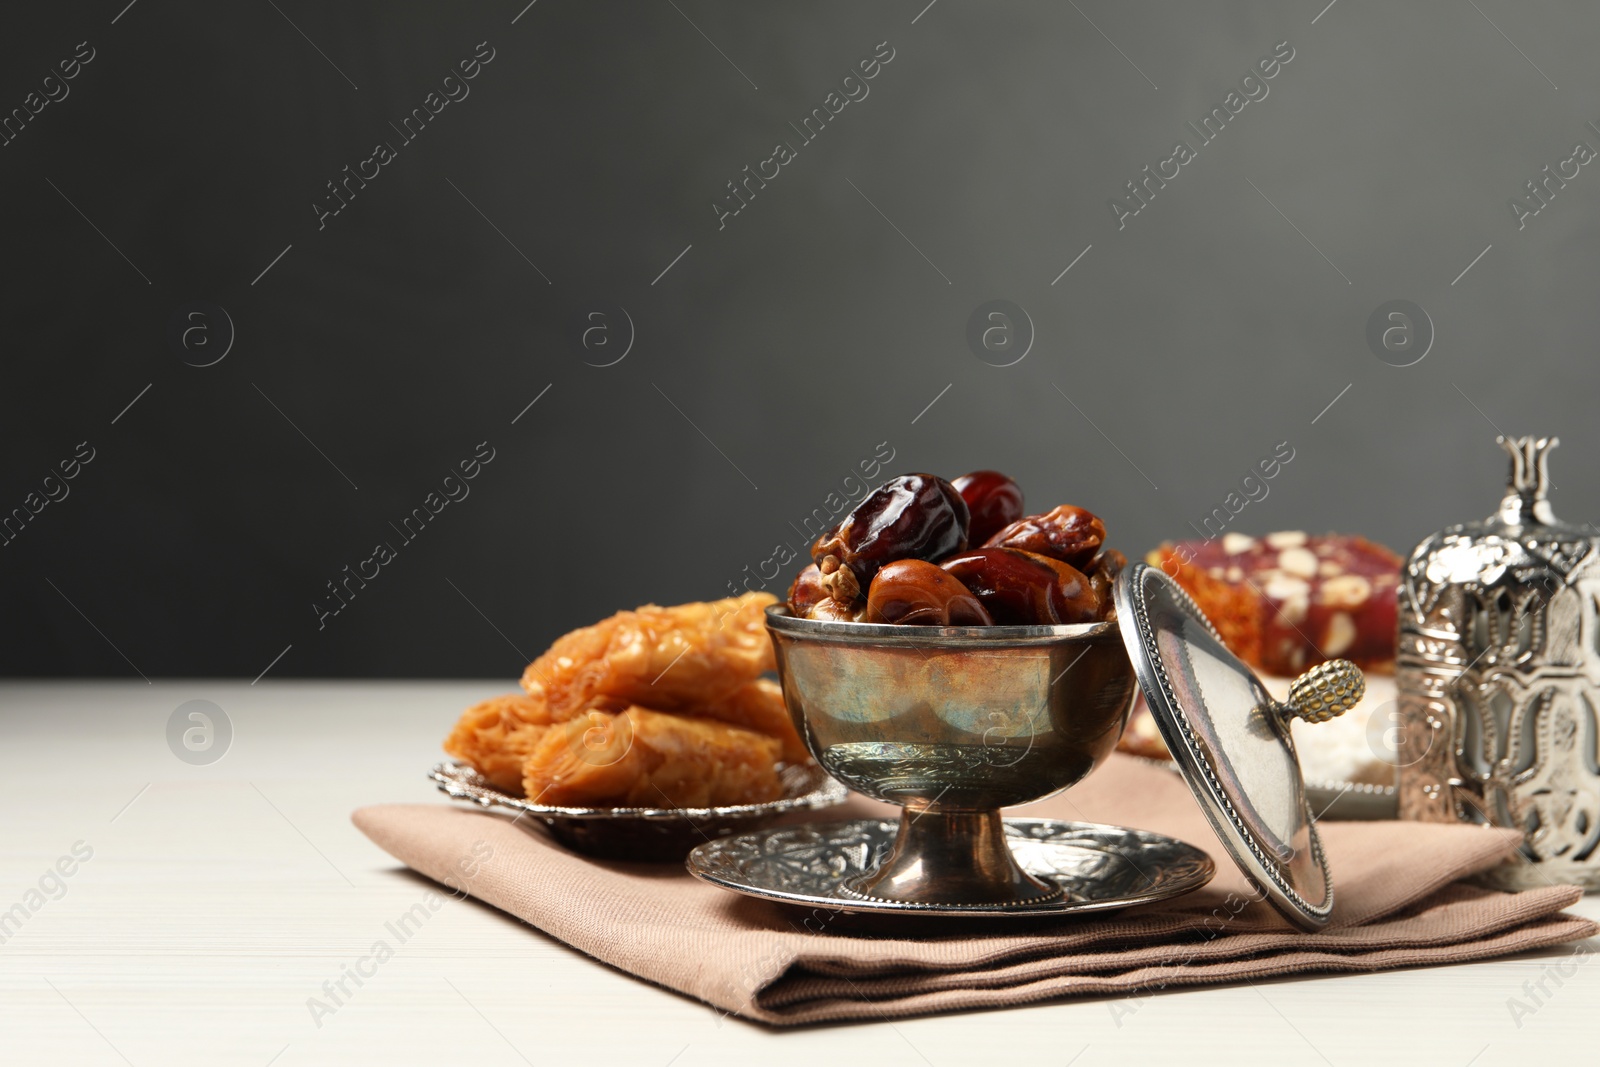 Photo of Tea, date fruits, Turkish delight and baklava dessert served in vintage tea set on white wooden table, space for text